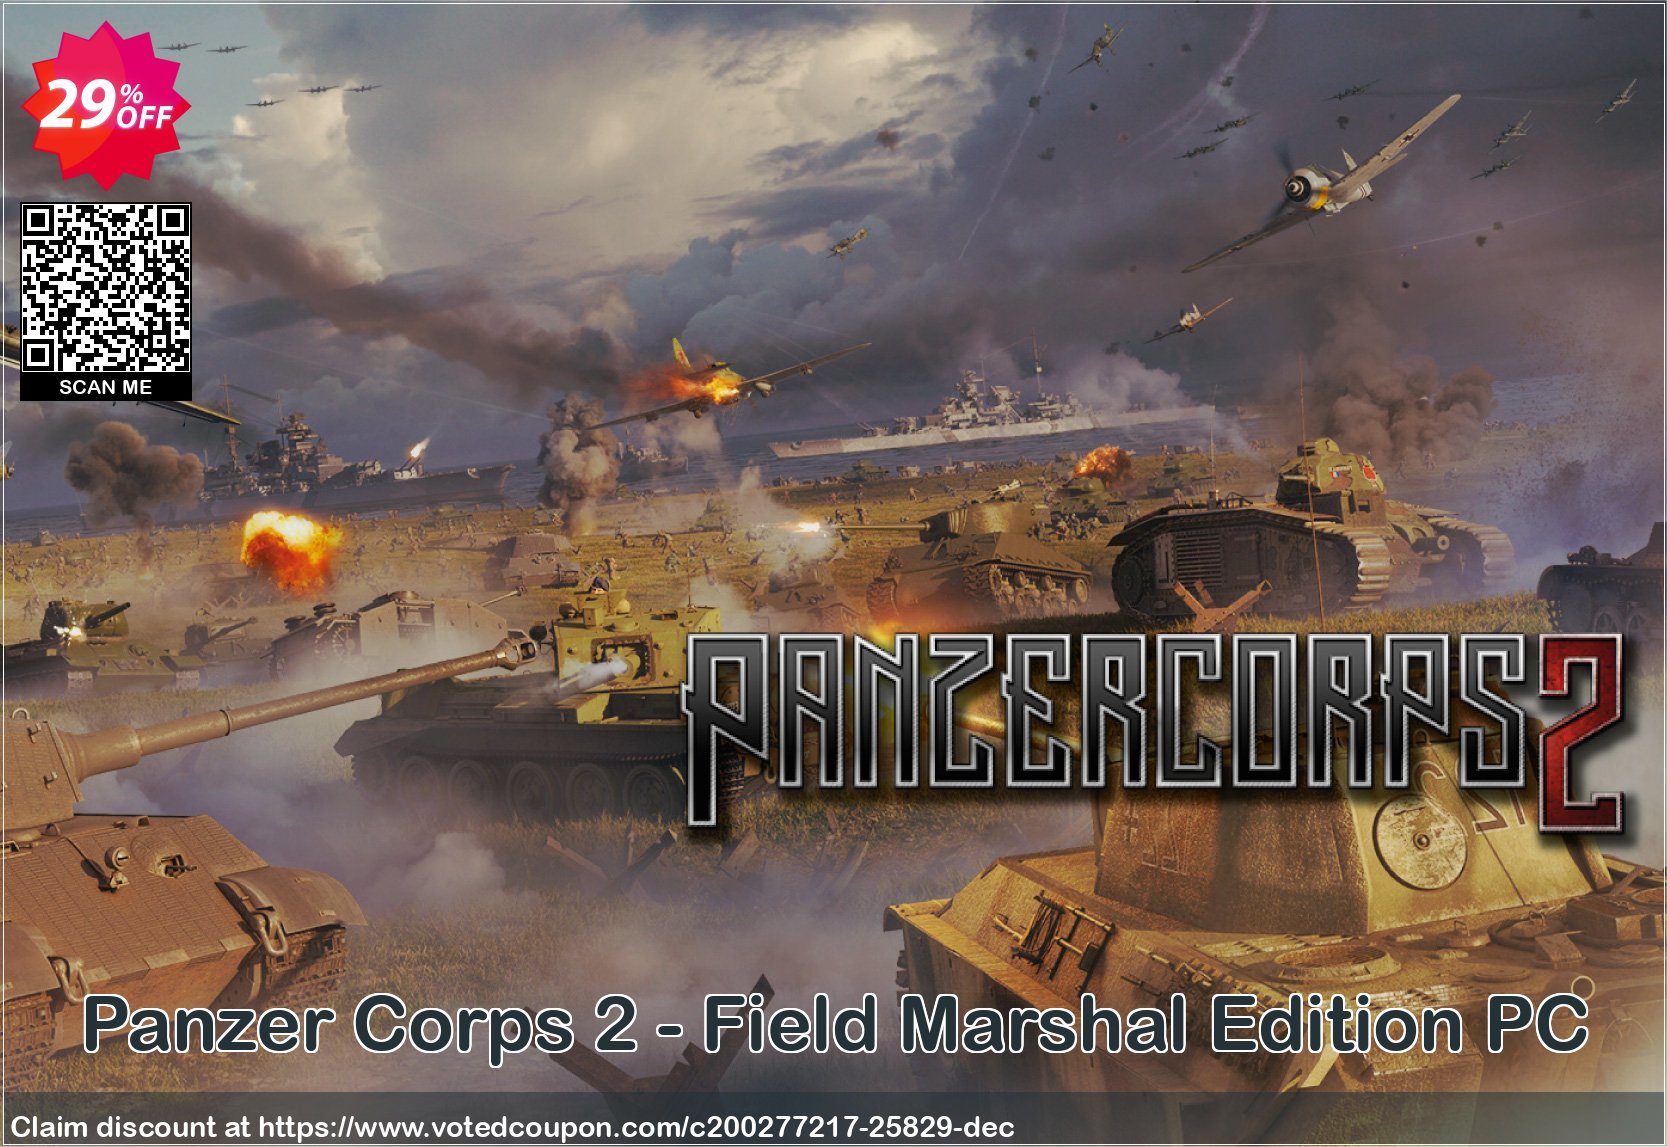 Panzer Corps 2 - Field Marshal Edition PC Coupon Code Apr 2024, 29% OFF - VotedCoupon